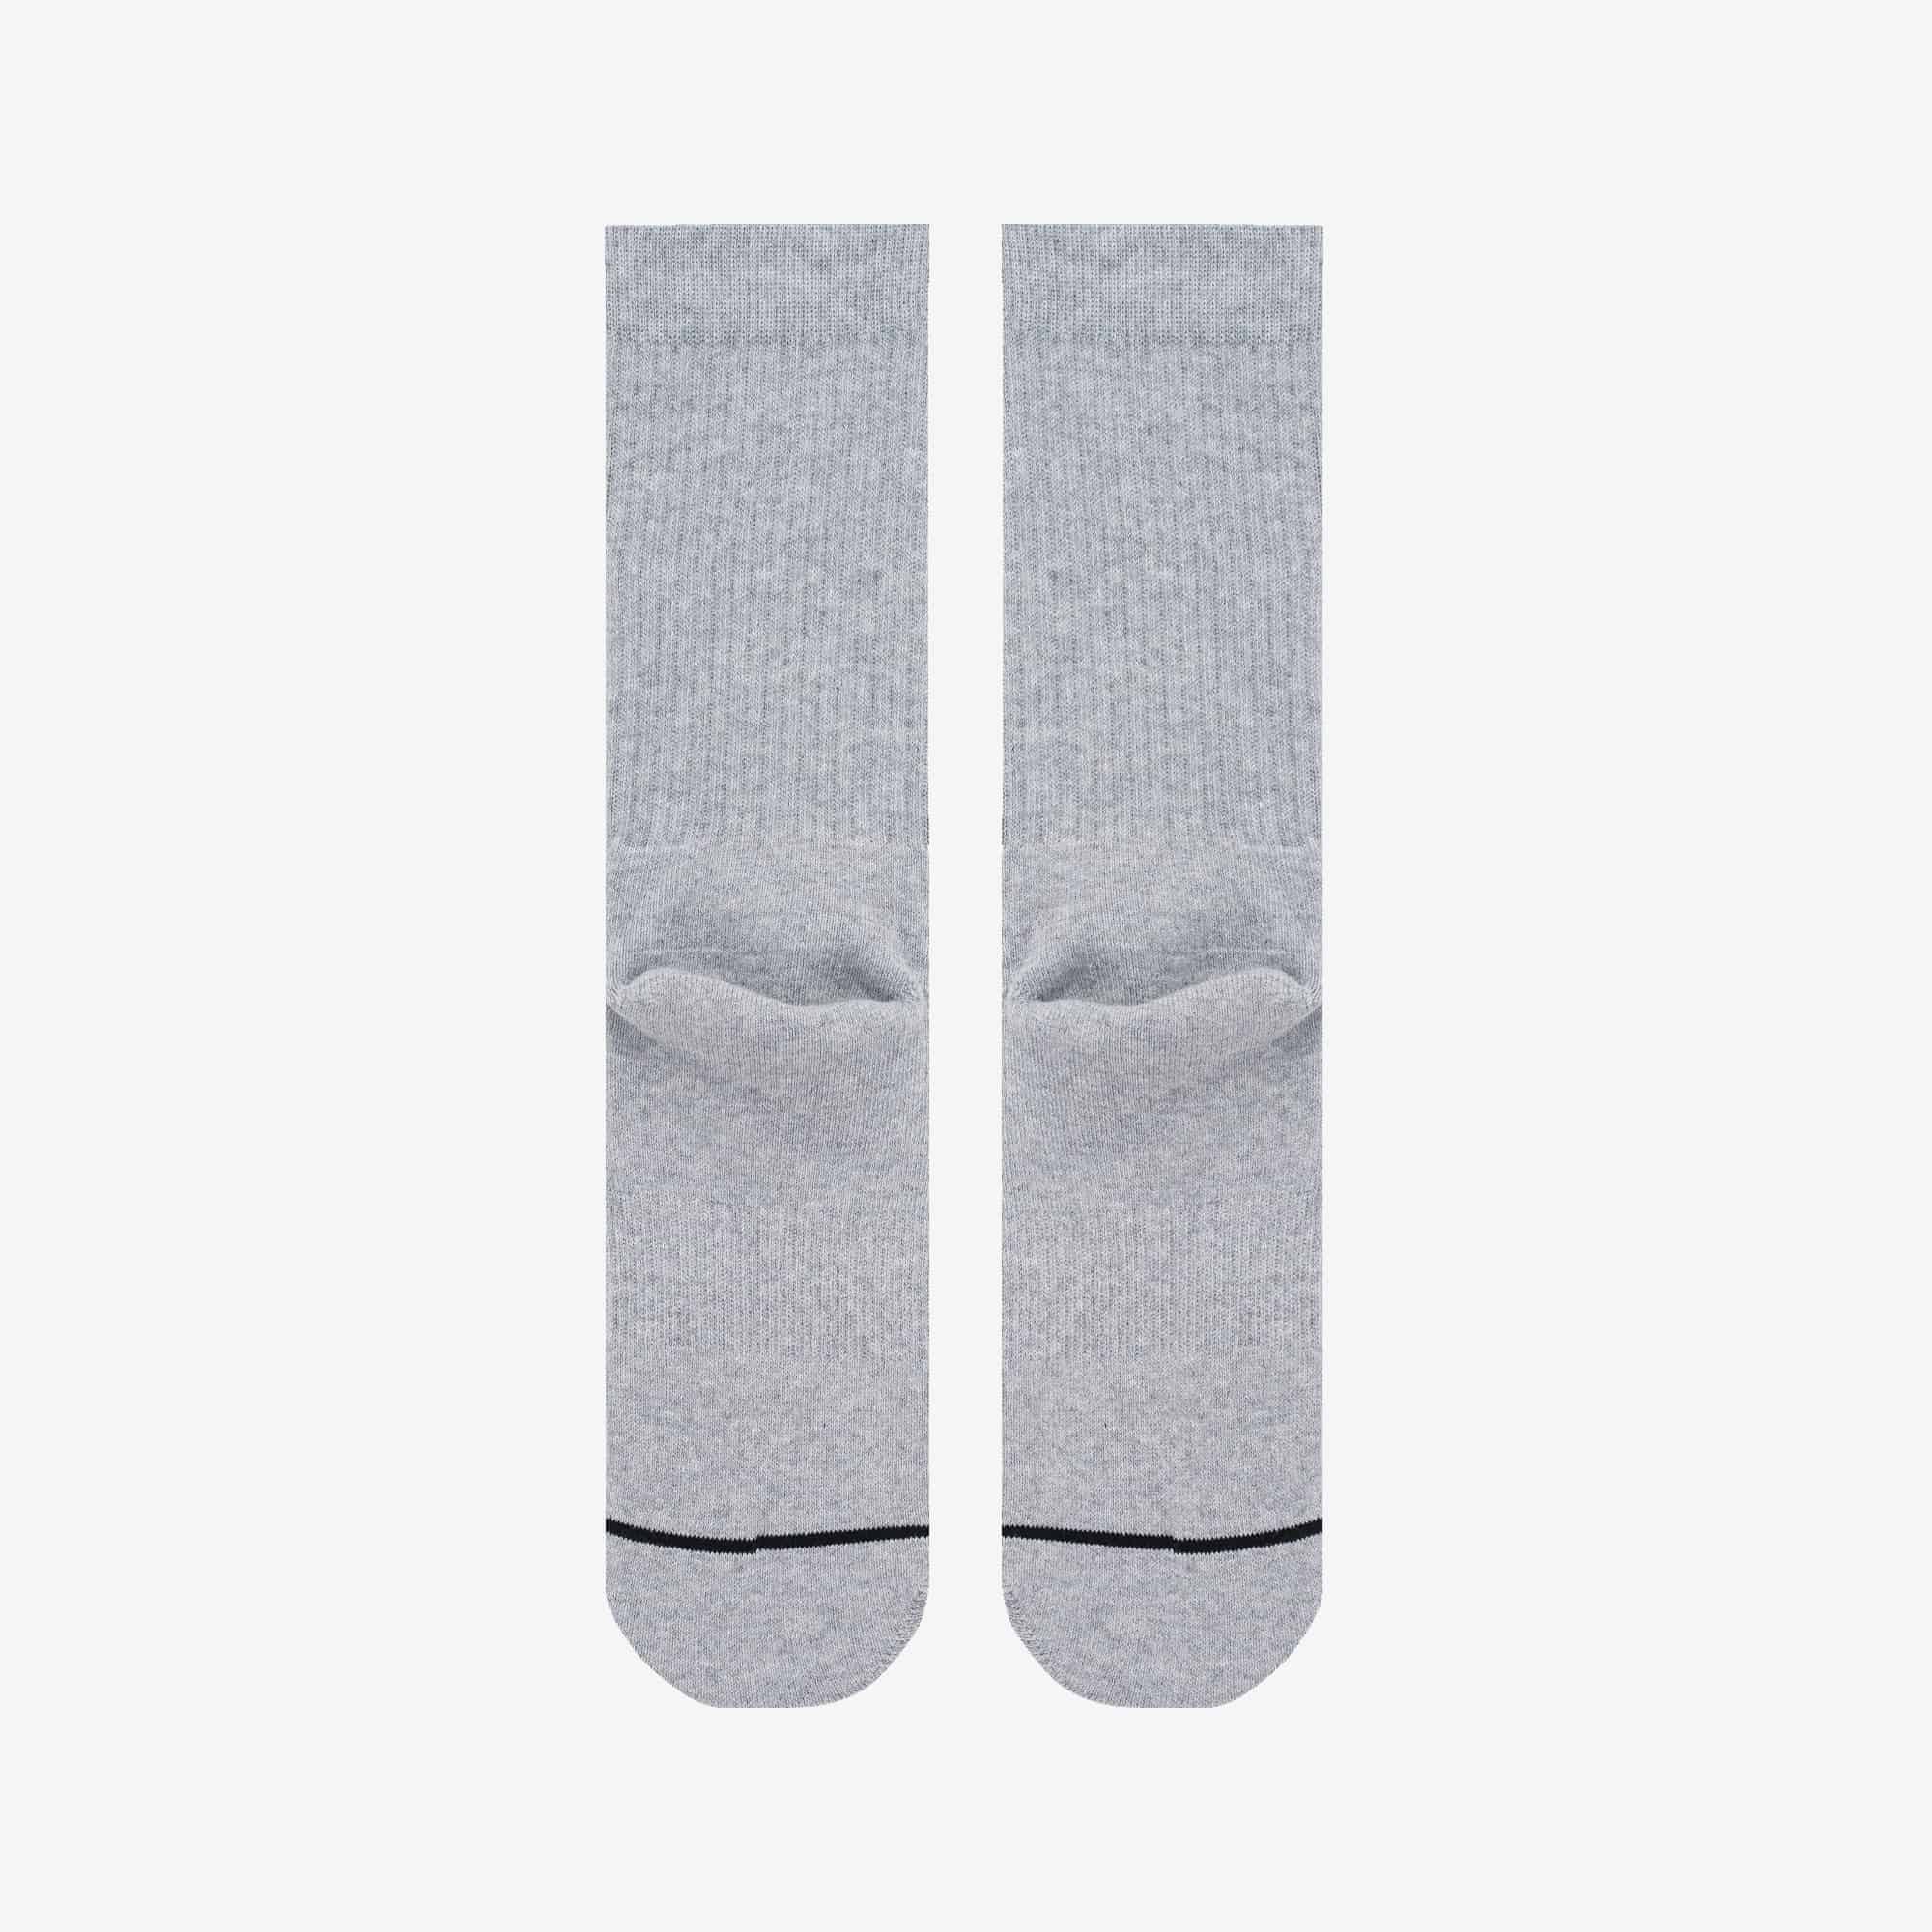 Blank Canvas in Grey | Socks by artists | Support the Arts